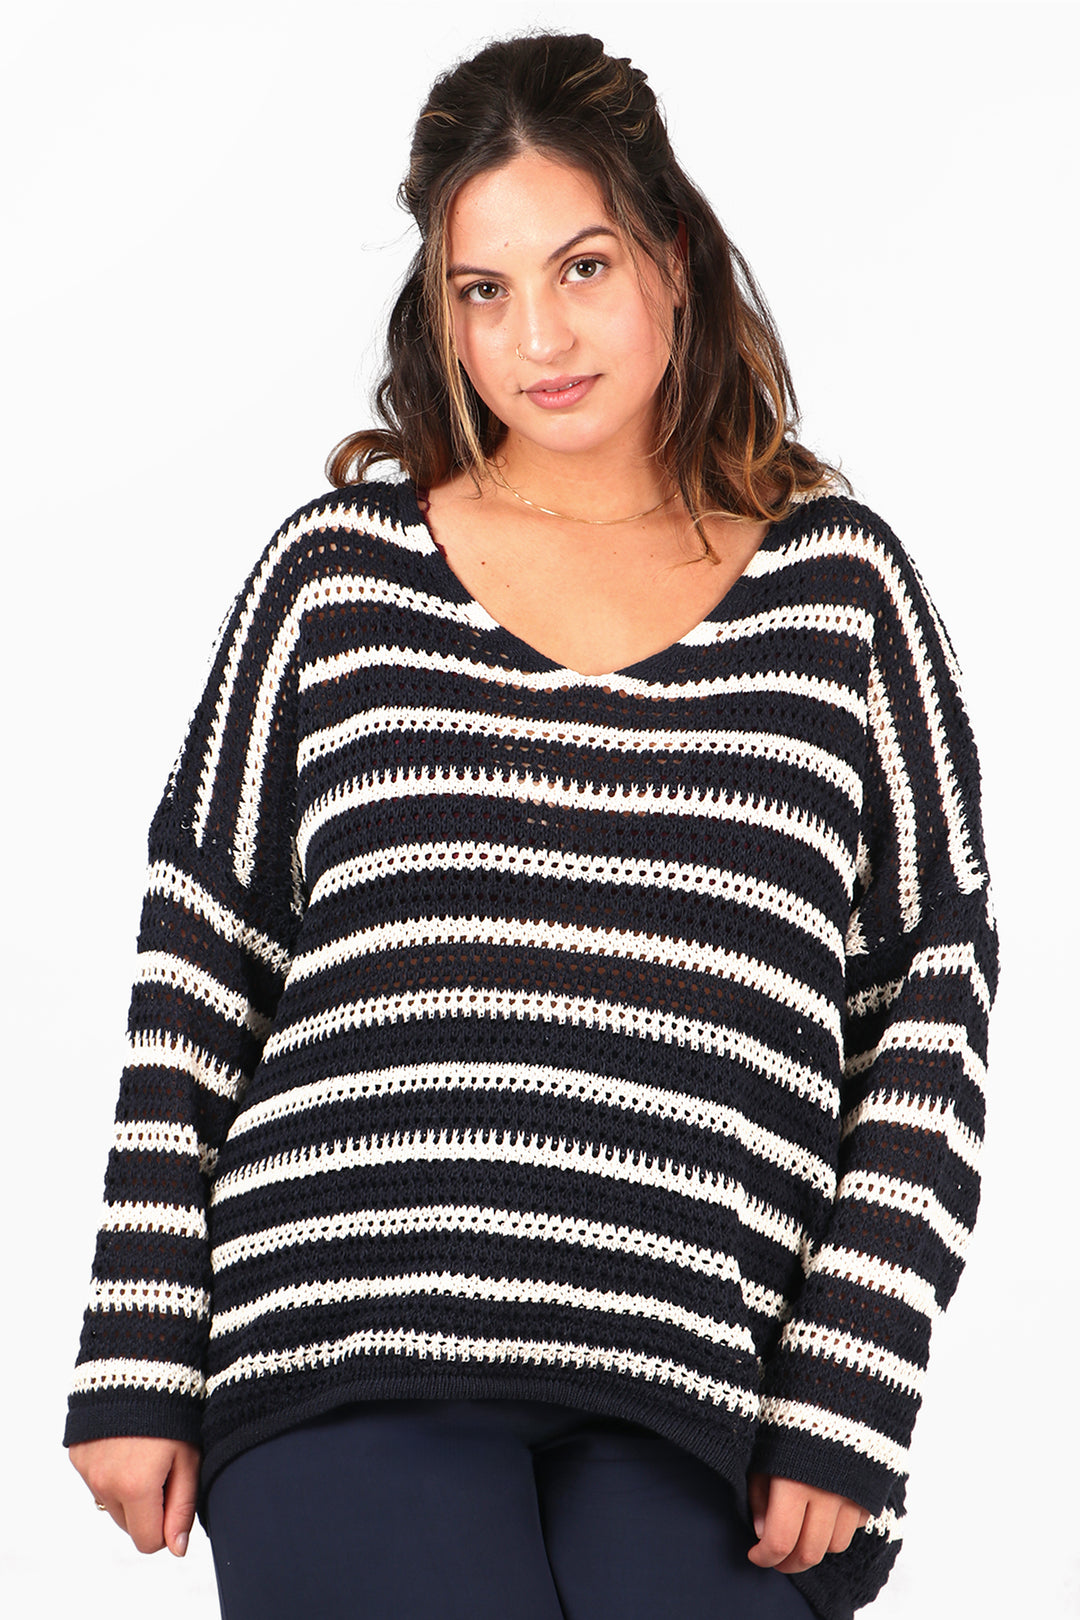 navy blue striped cotton jumper in an open knit fabric